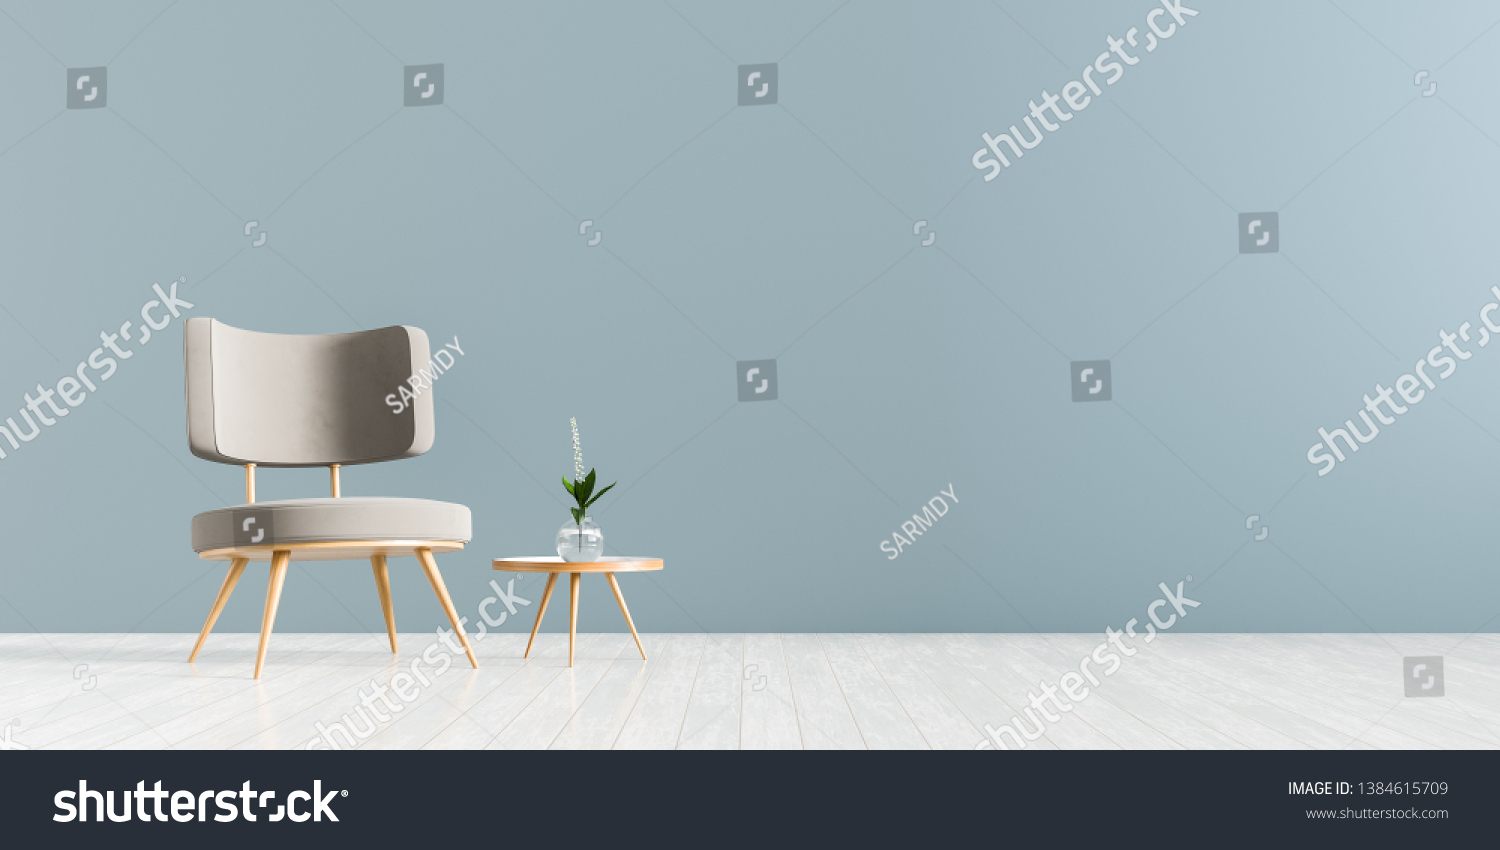 Modern living room with armchair and wooden small coffee table. Scandinavian style furniture design. 3D illustration. #1384615709